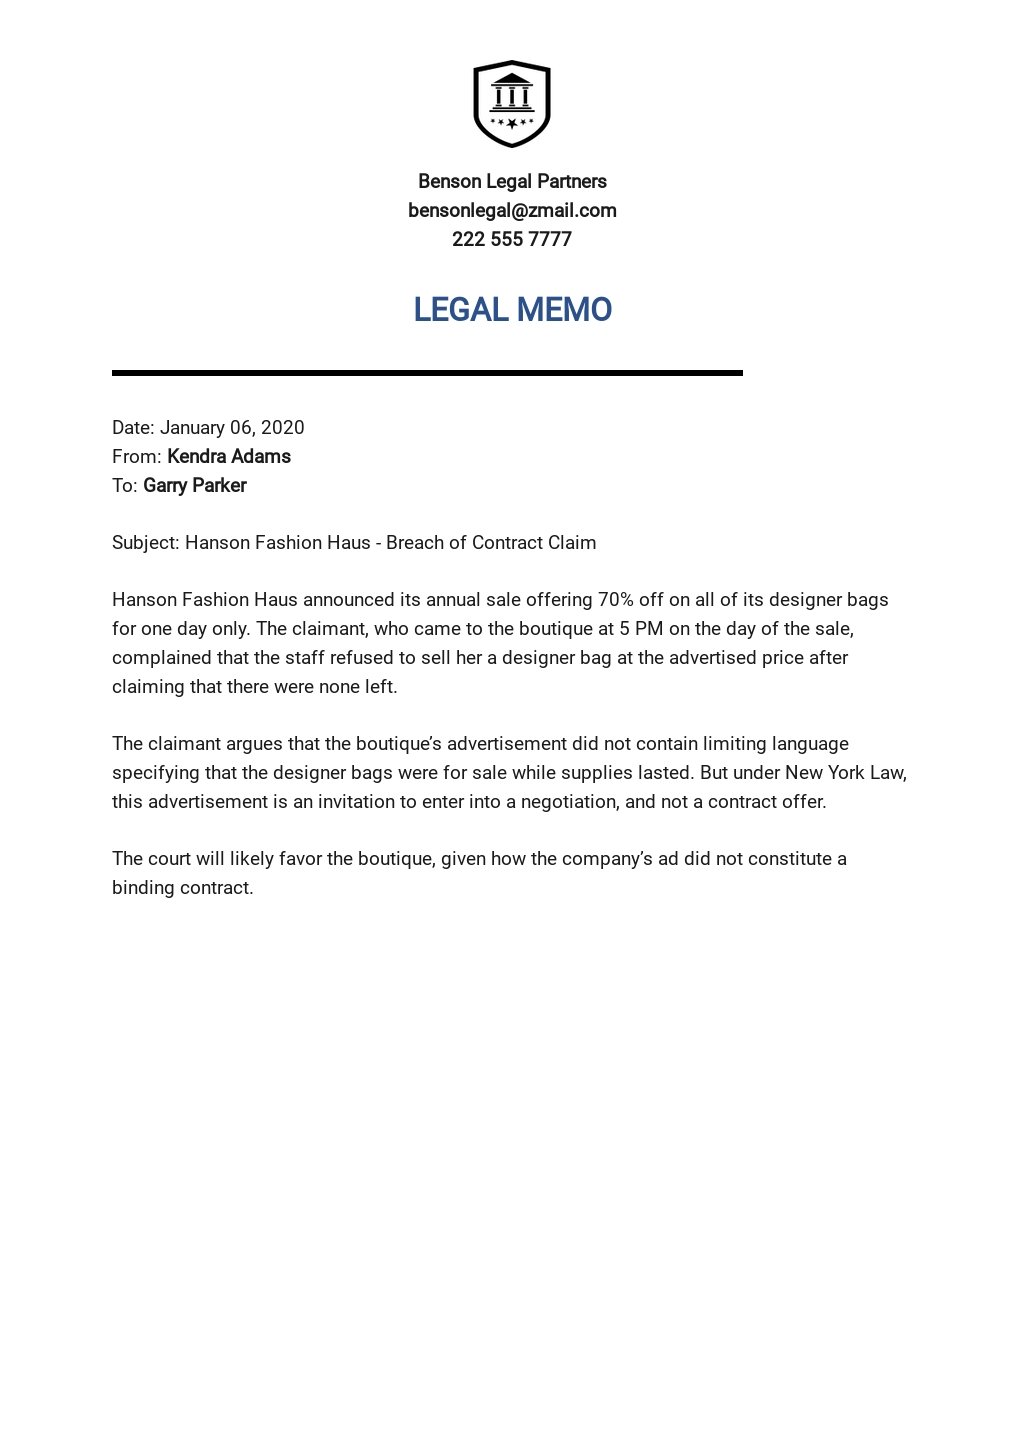 FREE Legal Memo Template - PDF | Word | Apple Pages ...